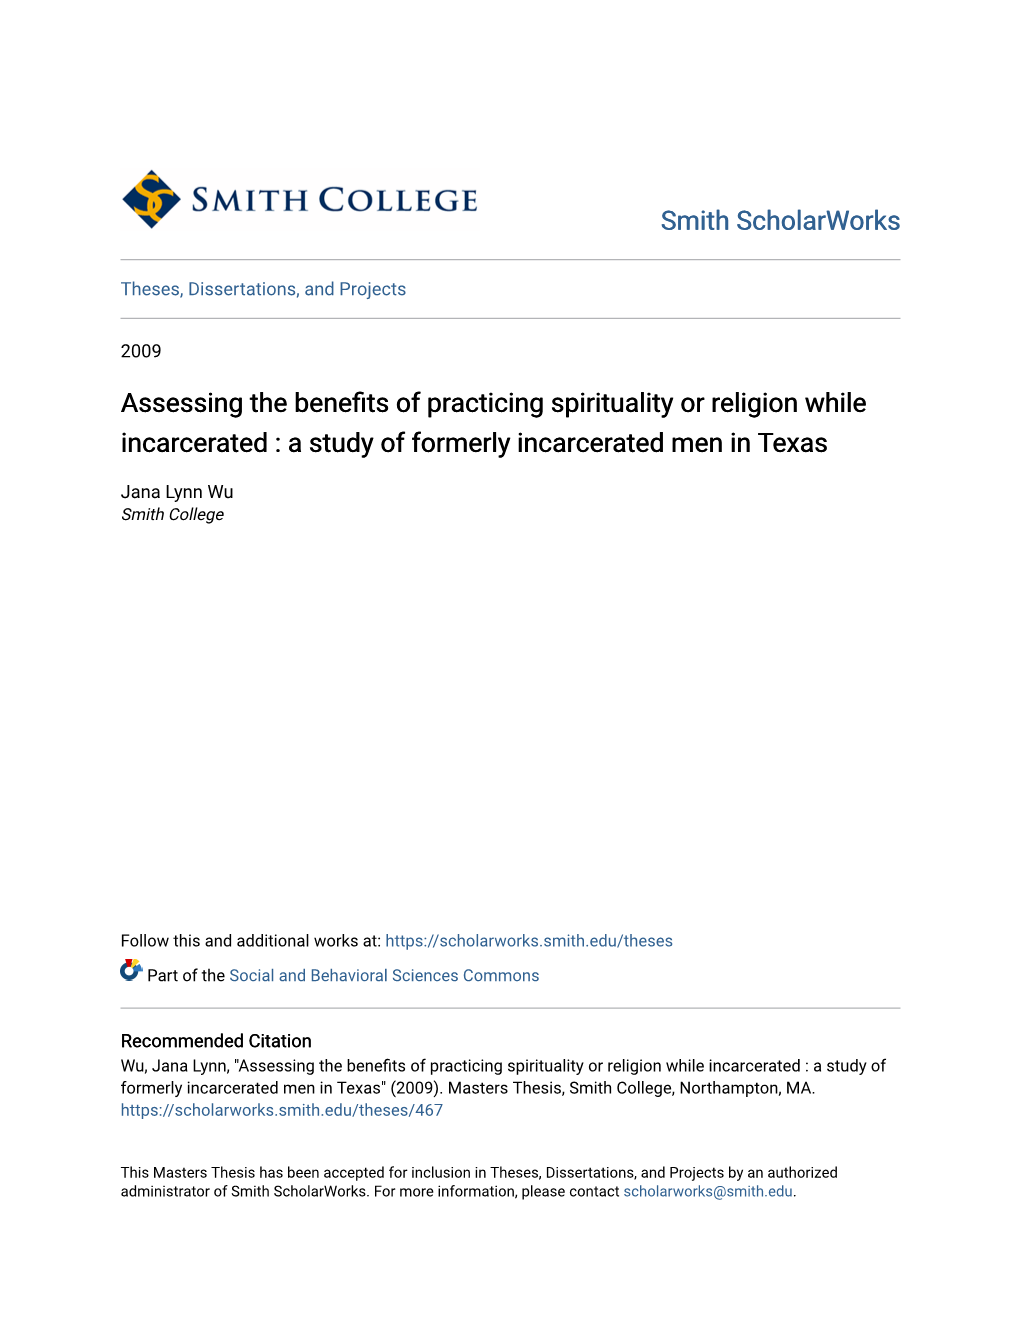 Assessing the Benefits of Practicing Spirituality Or Religion While Incarcerated : a Study of Formerly Incarcerated Men in Texas